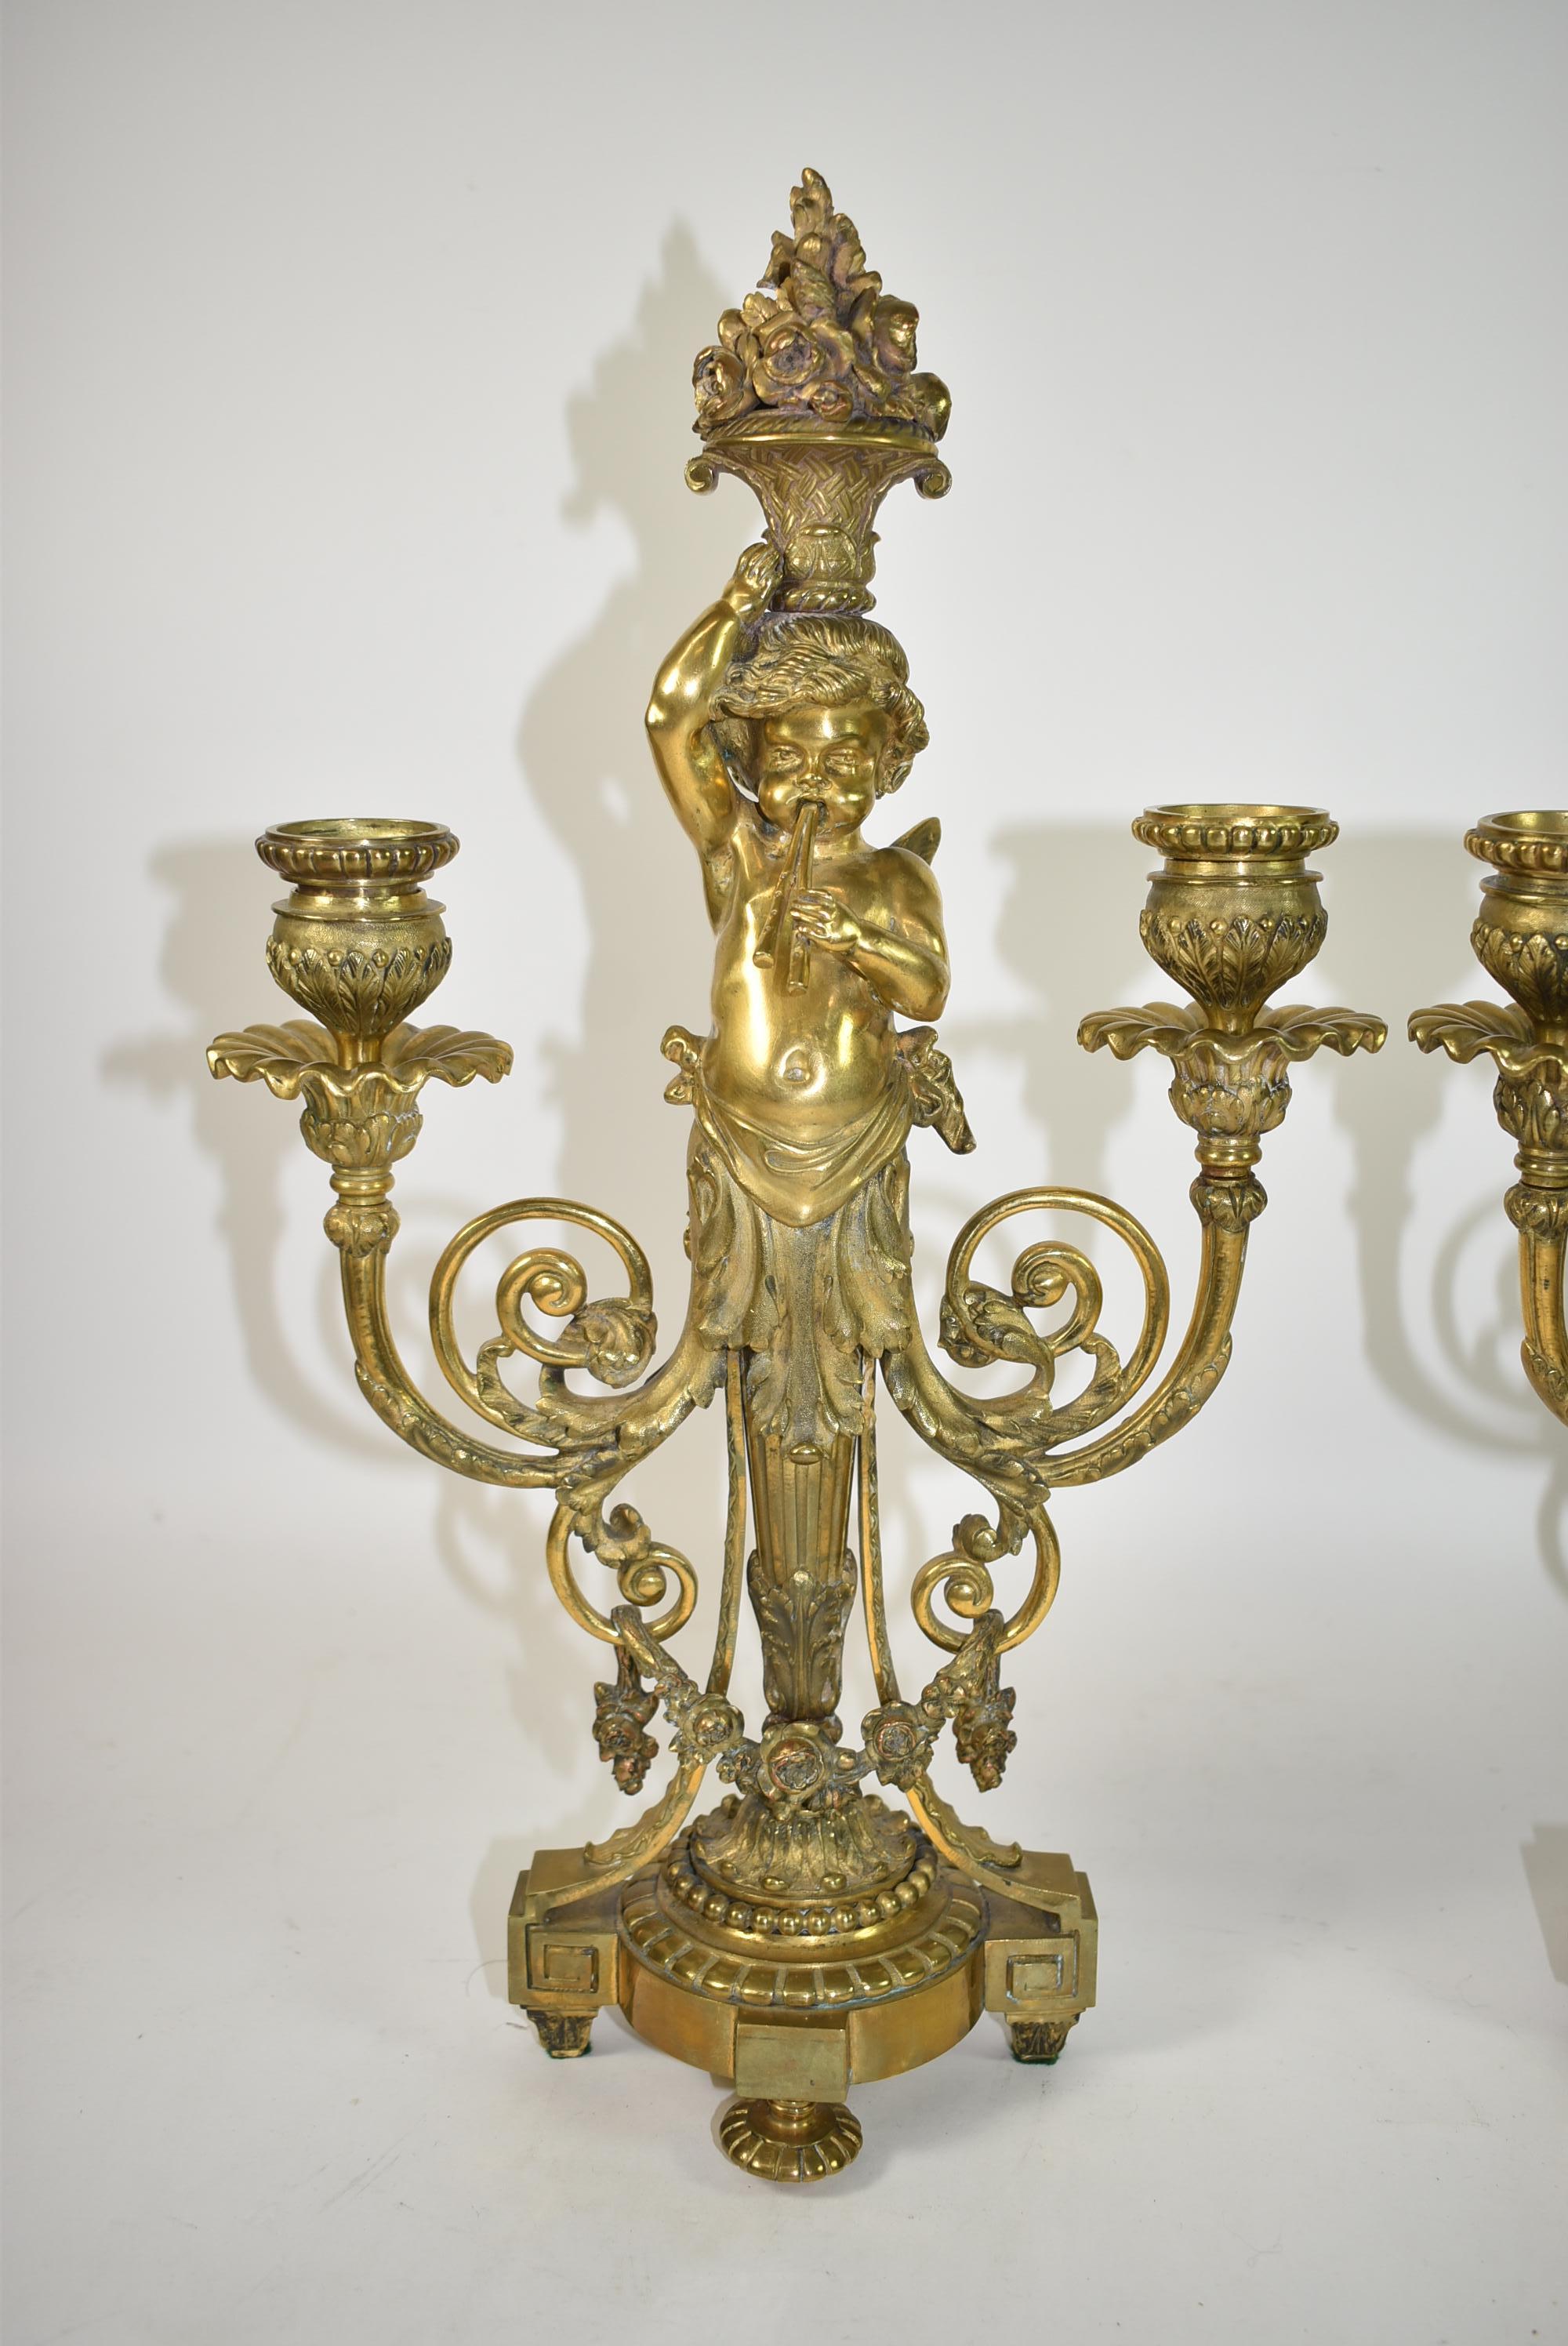 Pair of French neoclassic gilt bronze Putti cherub candelabras circa 1910. Acanthus leaf details with rose swags, scrolls and ruffled candleholders. Cherub Putti central figures hold baskets of flowers on the their heads playing double flute